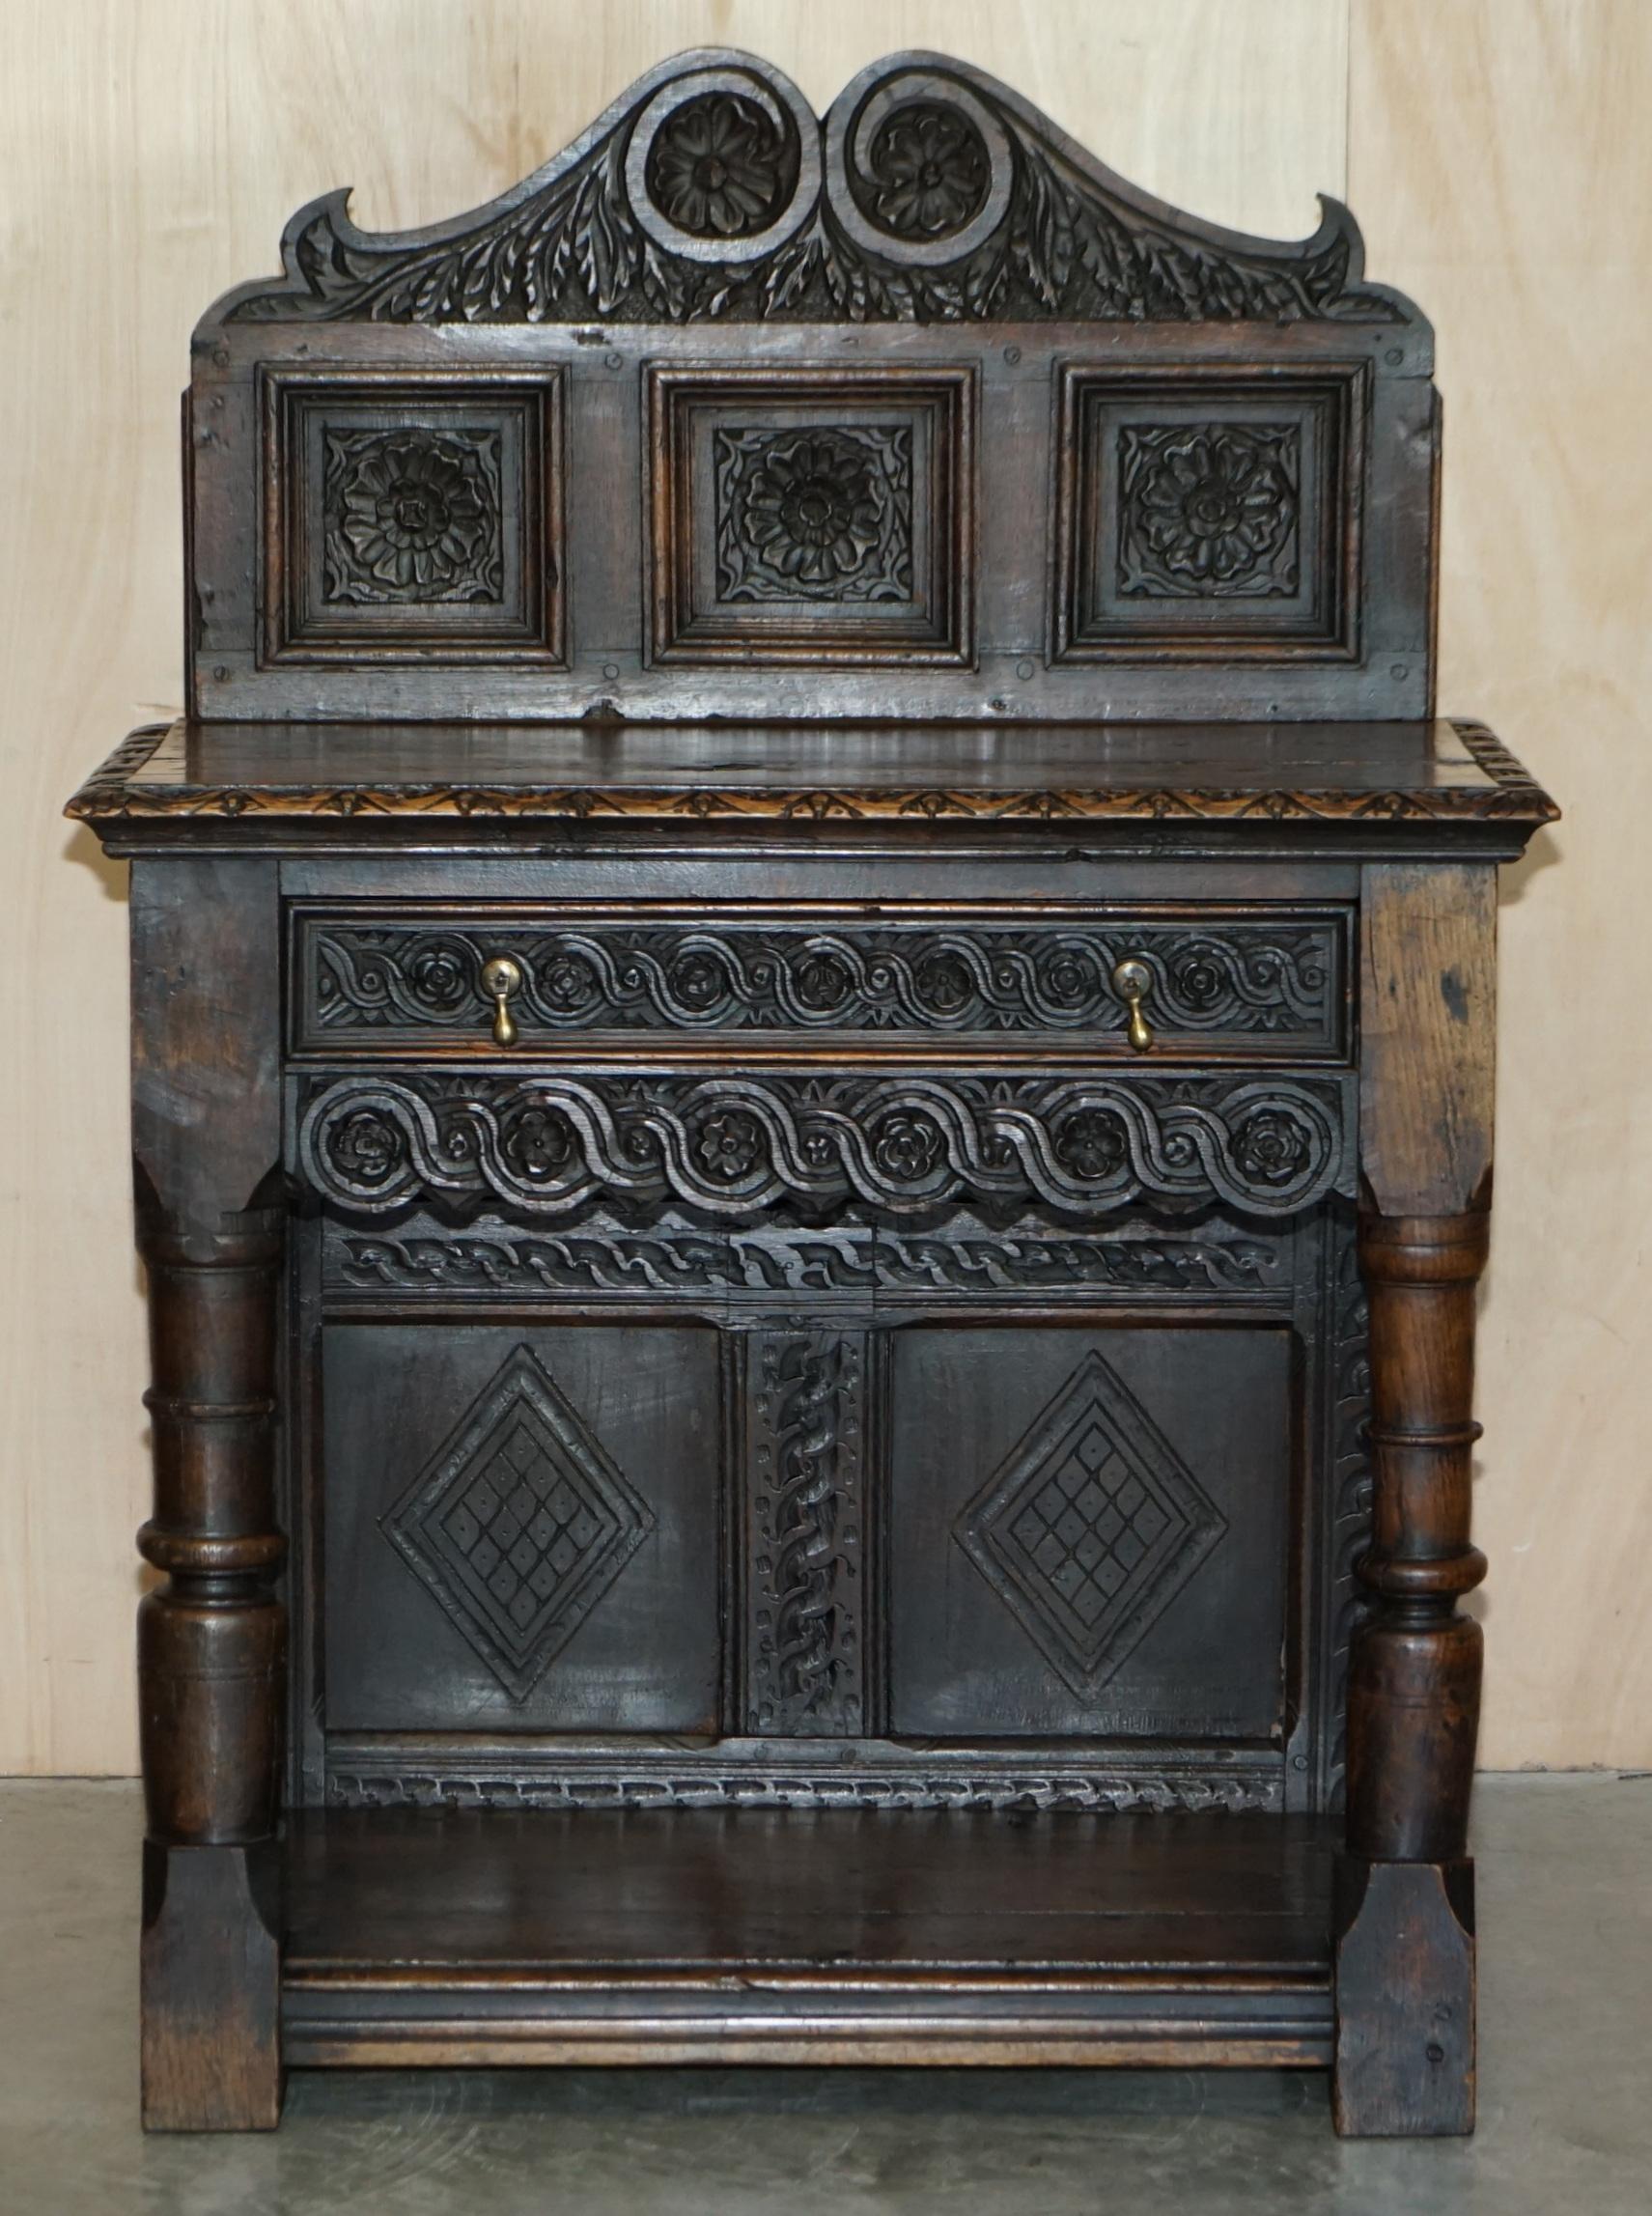 We are delighted to offer for sale this lovely 18th century circa 1720 English oak hand carved console hall table with single drawer.

A good looking well made and decorative piece made in the Jacobean / Gothic style. It has a large single drawer